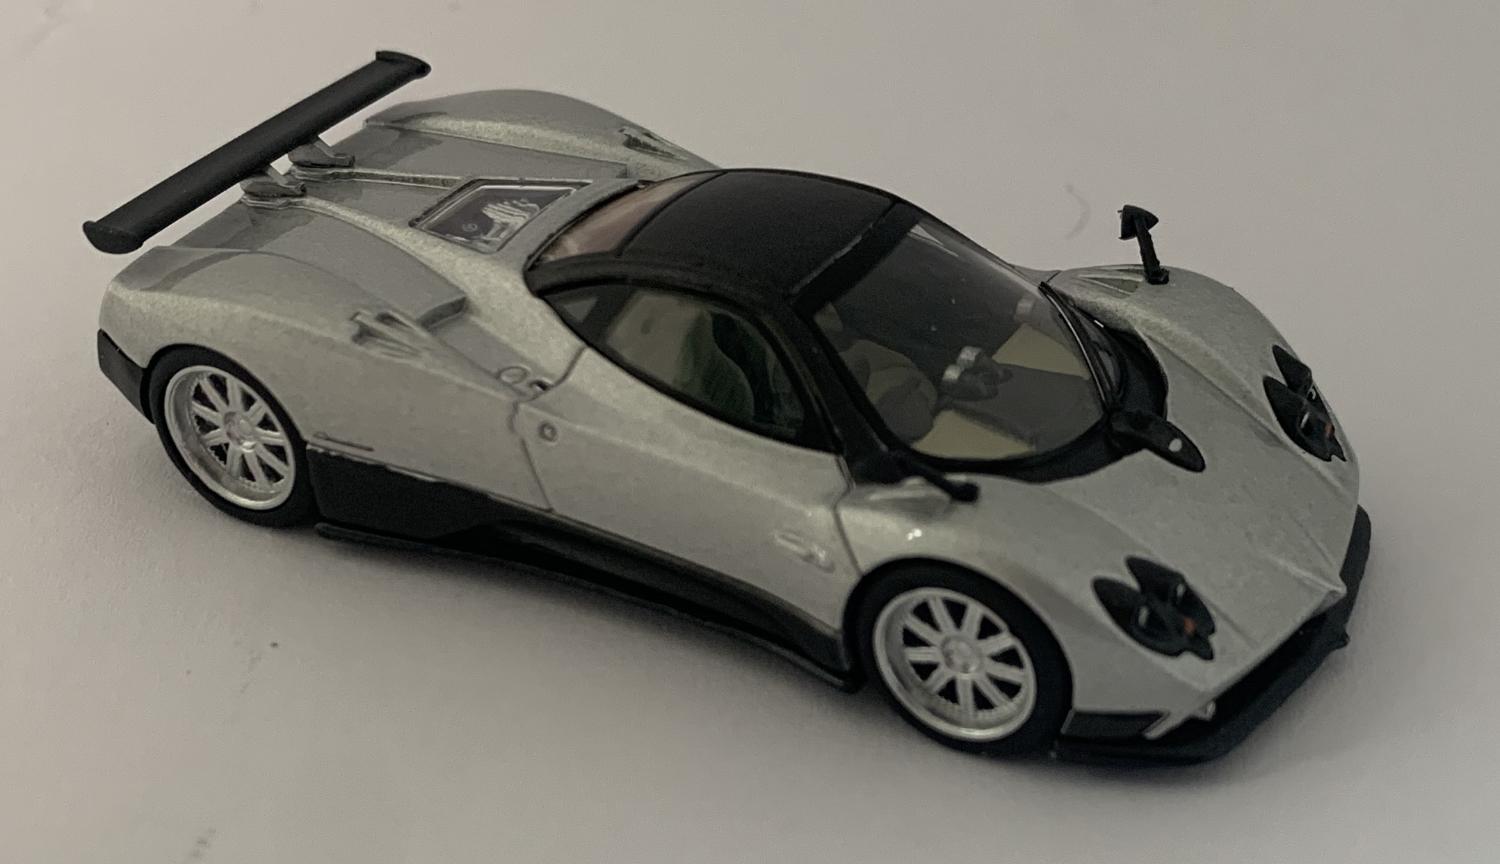 An excellent scale model of a Pagani Zonda F decorated in silver with high rear spoiler and silver wheels.